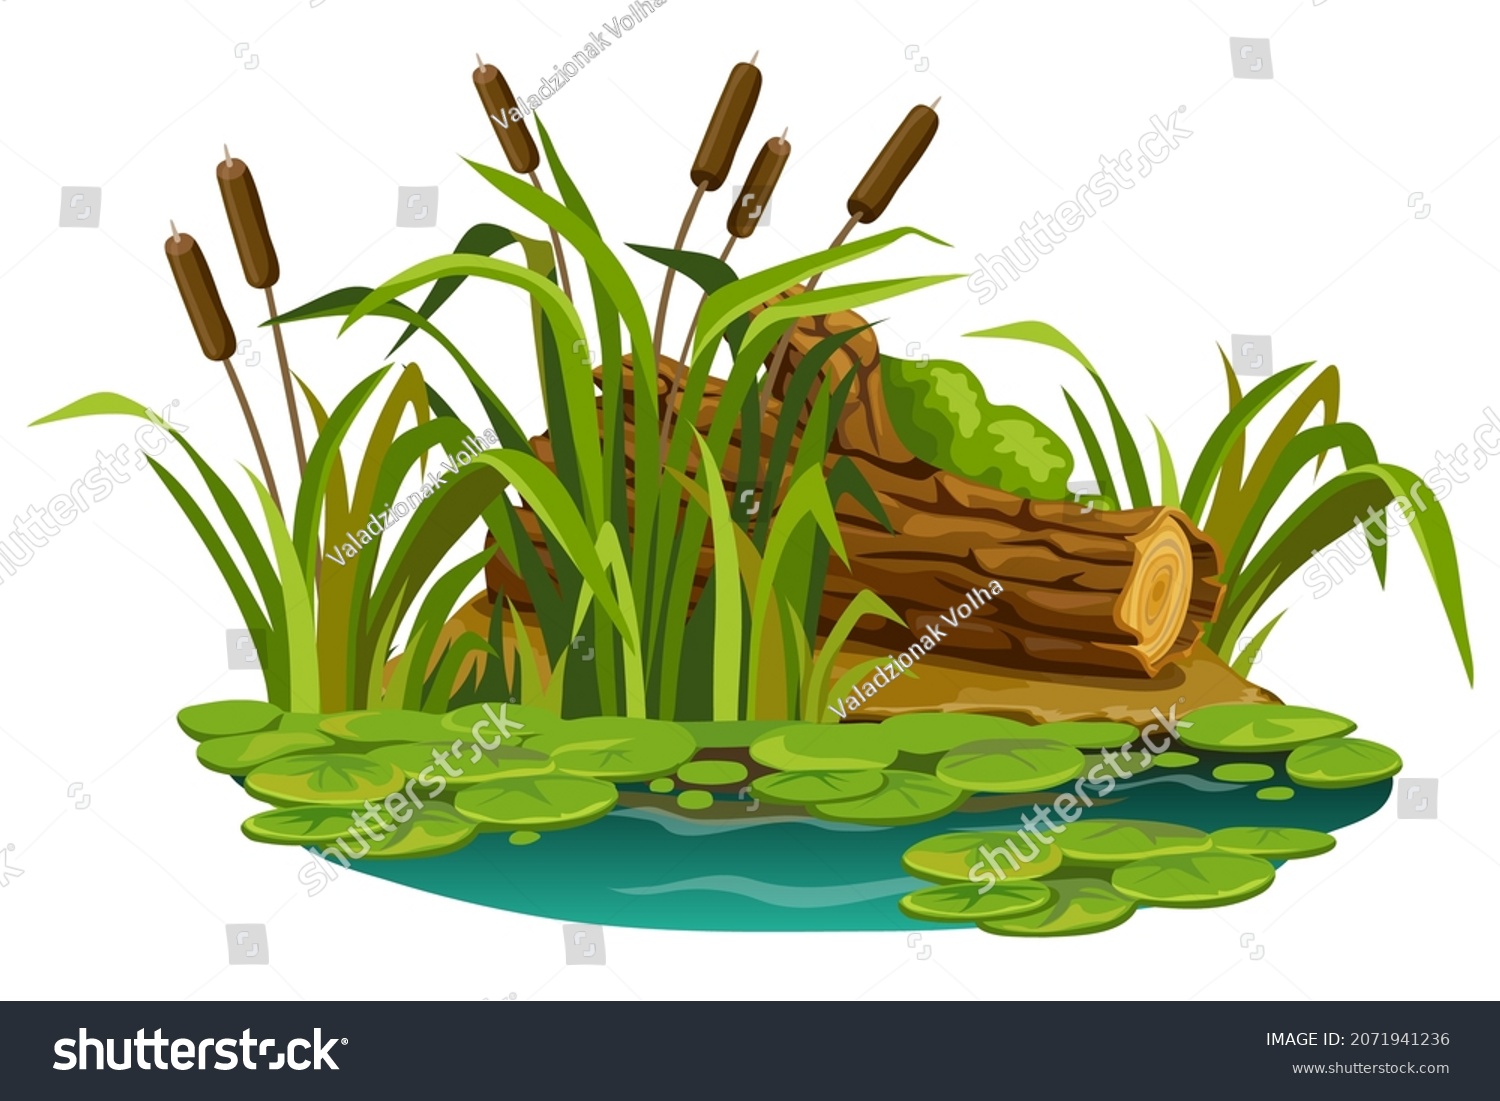 Moss on the stump in marsh. Cartoon log in swamp jungle. Broken tree oak, cattails, salvinia, water lily. Isolated vector element on white background. #2071941236